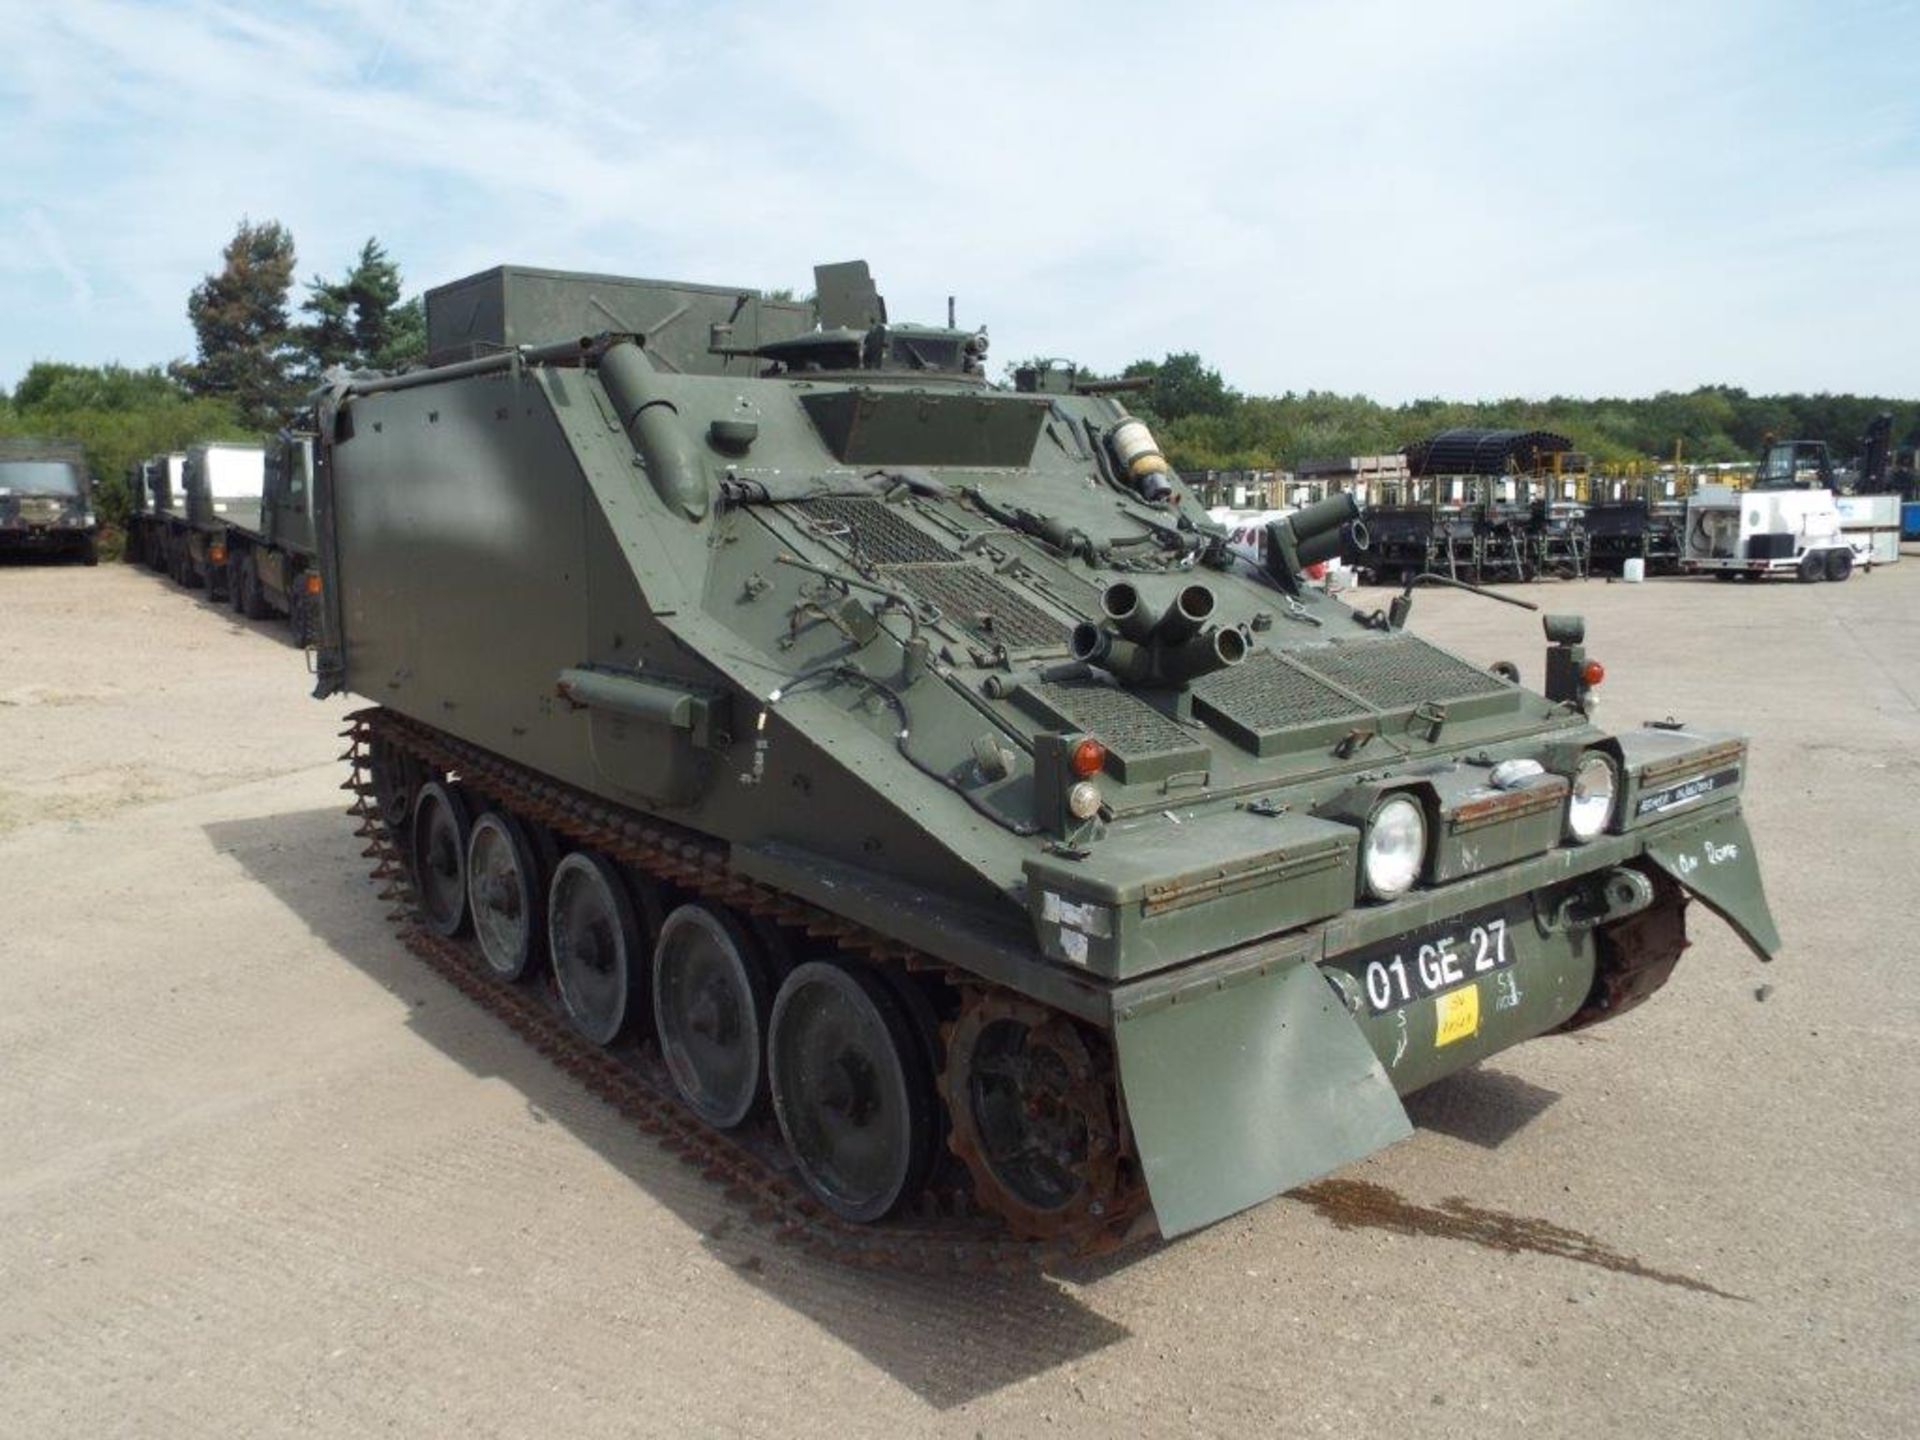 CVRT (Combat Vehicle Reconnaissance Tracked) Dieselised FV105 Sultan Armoured Personnel Carrier